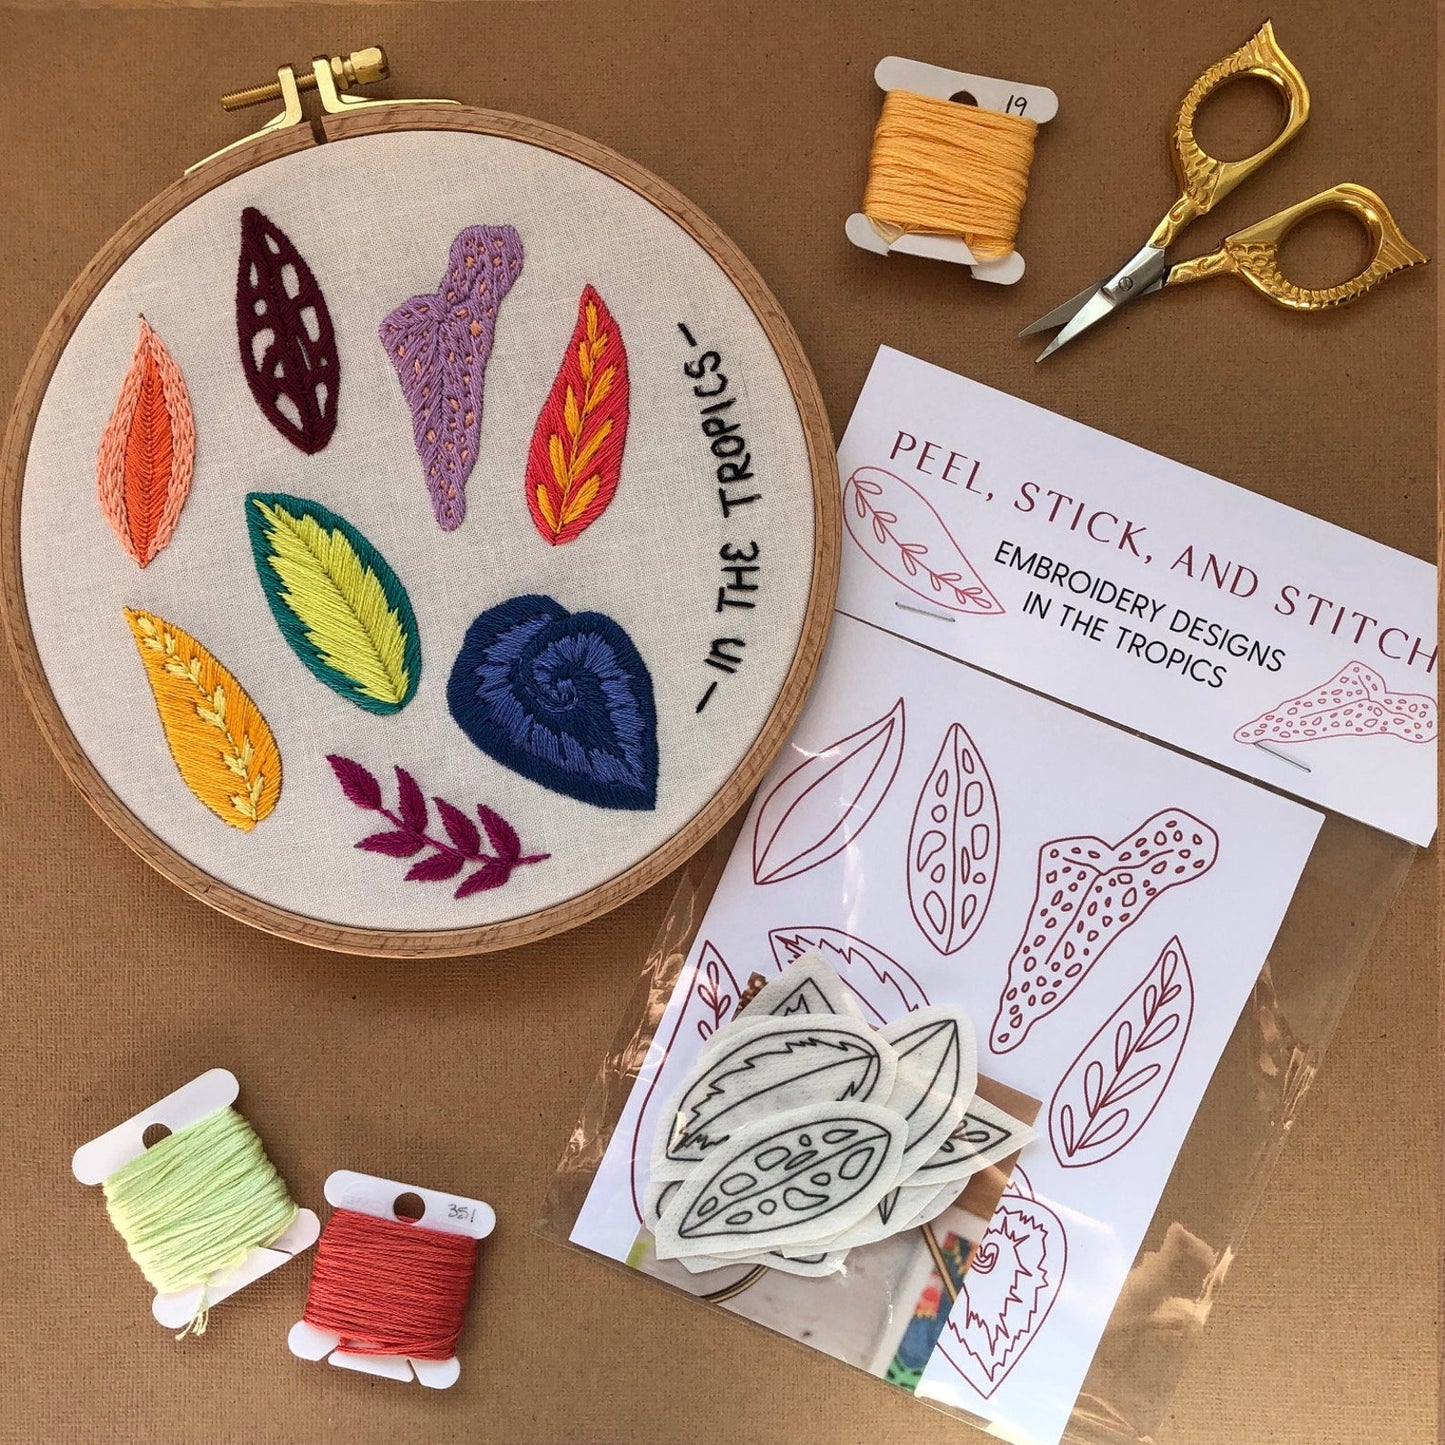 In The Tropics - Peel Stick and Stitch Hand Embroidery Patterns